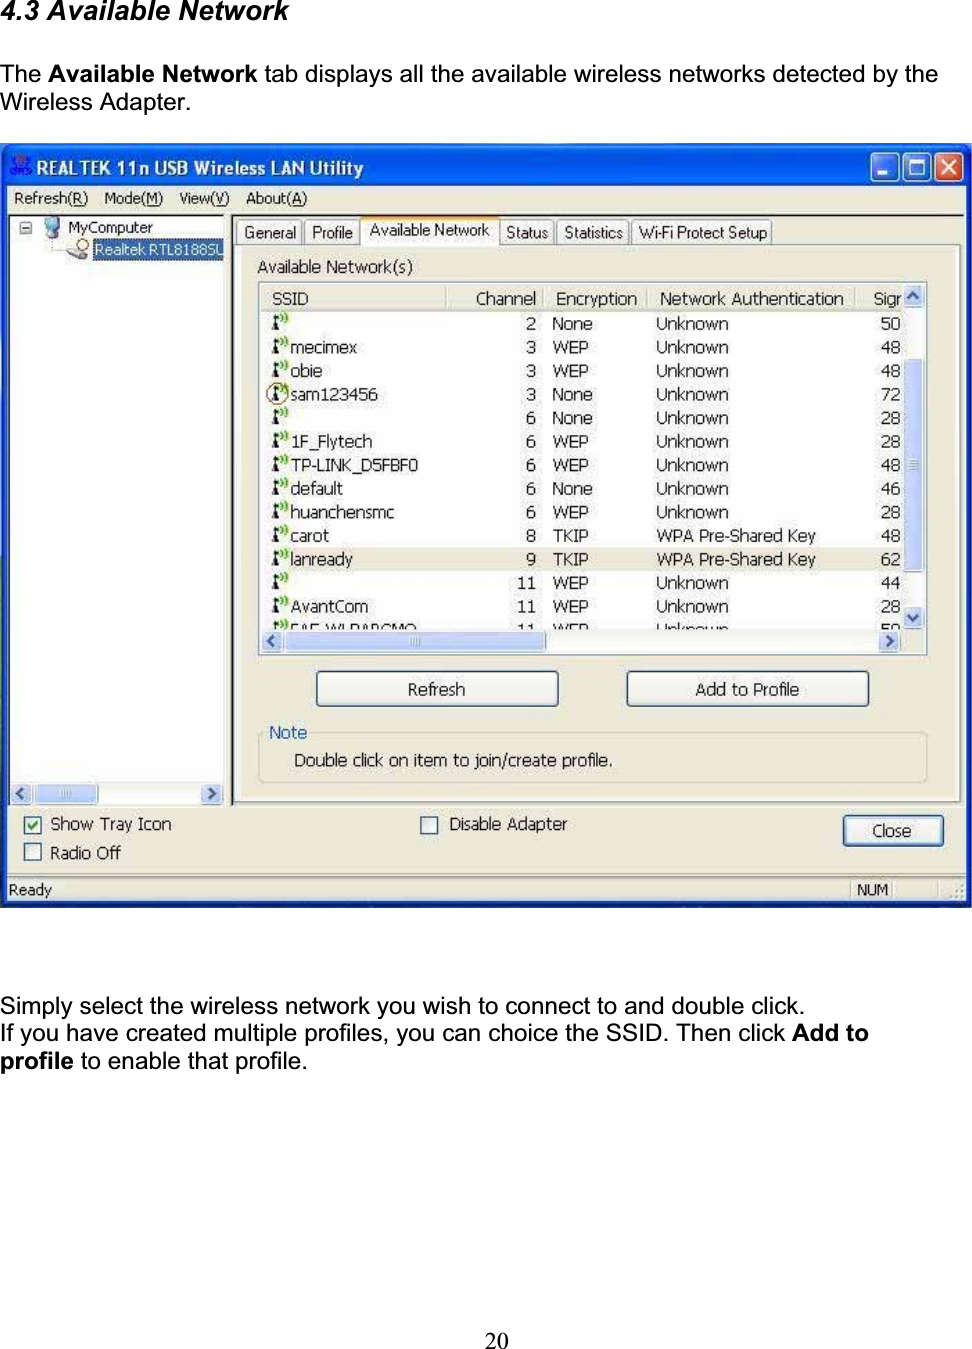 204.3 Available NetworkThe Available Network tab displays all the available wireless networks detected by the Wireless Adapter. Simply select the wireless network you wish to connect to and double click.If you have created multiple profiles, you can choice the SSID. Then click Add to profile to enable that profile.